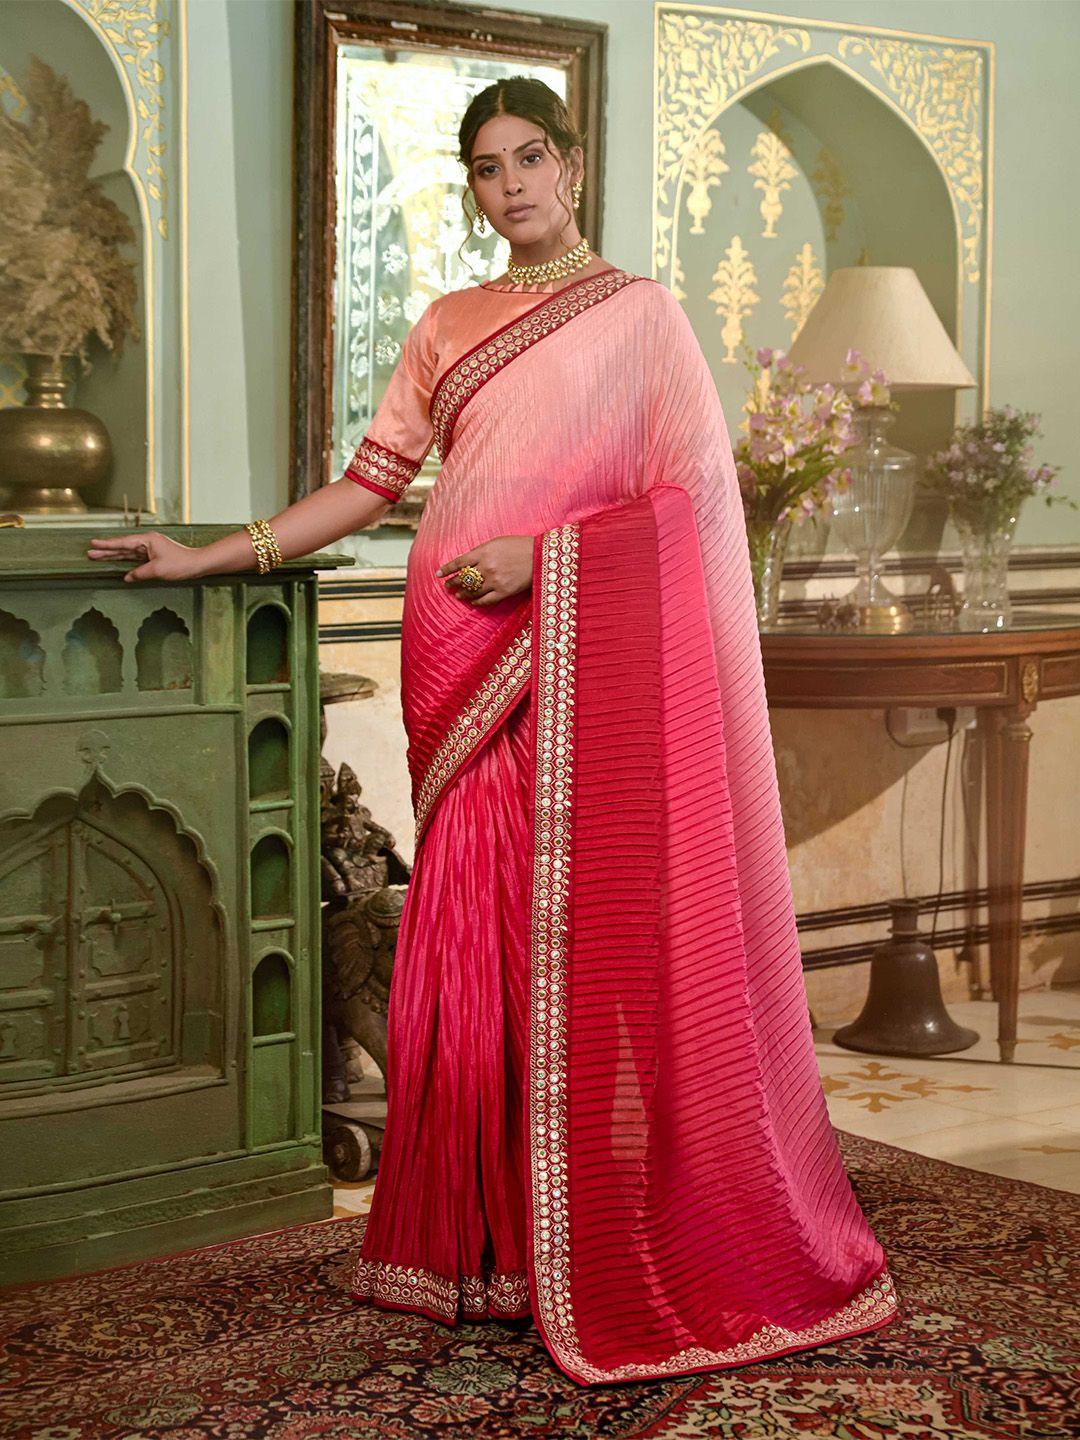 mitera ombre dyed embellished saree